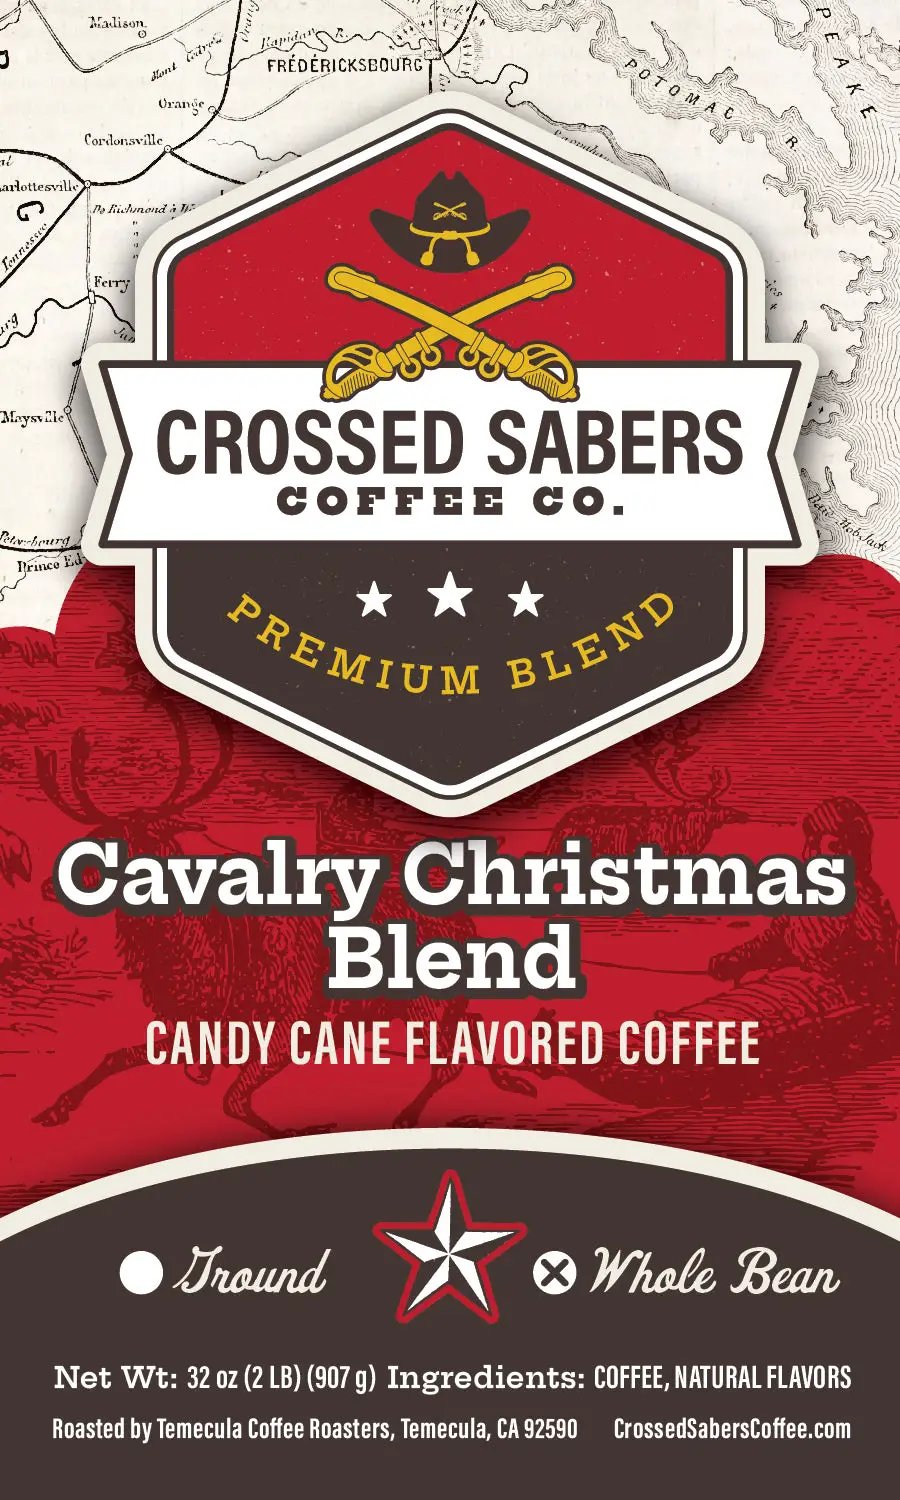 Crossed Sabers Coffee Cavalry Christmas 2lb Whole Bean